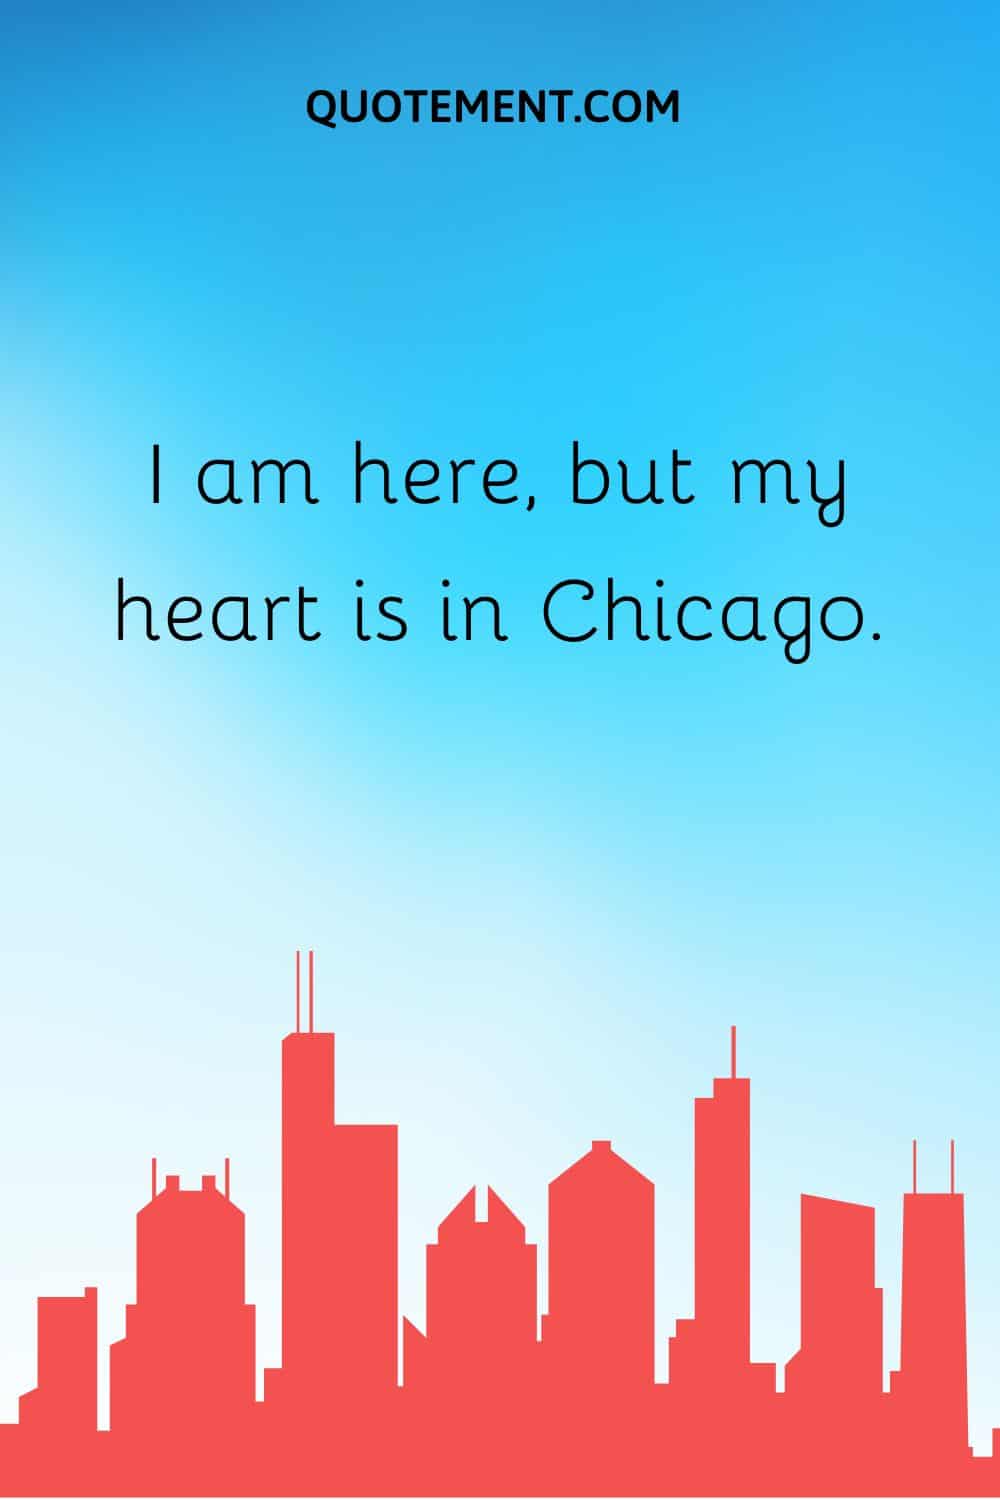 I am here, but my heart is in Chicago.